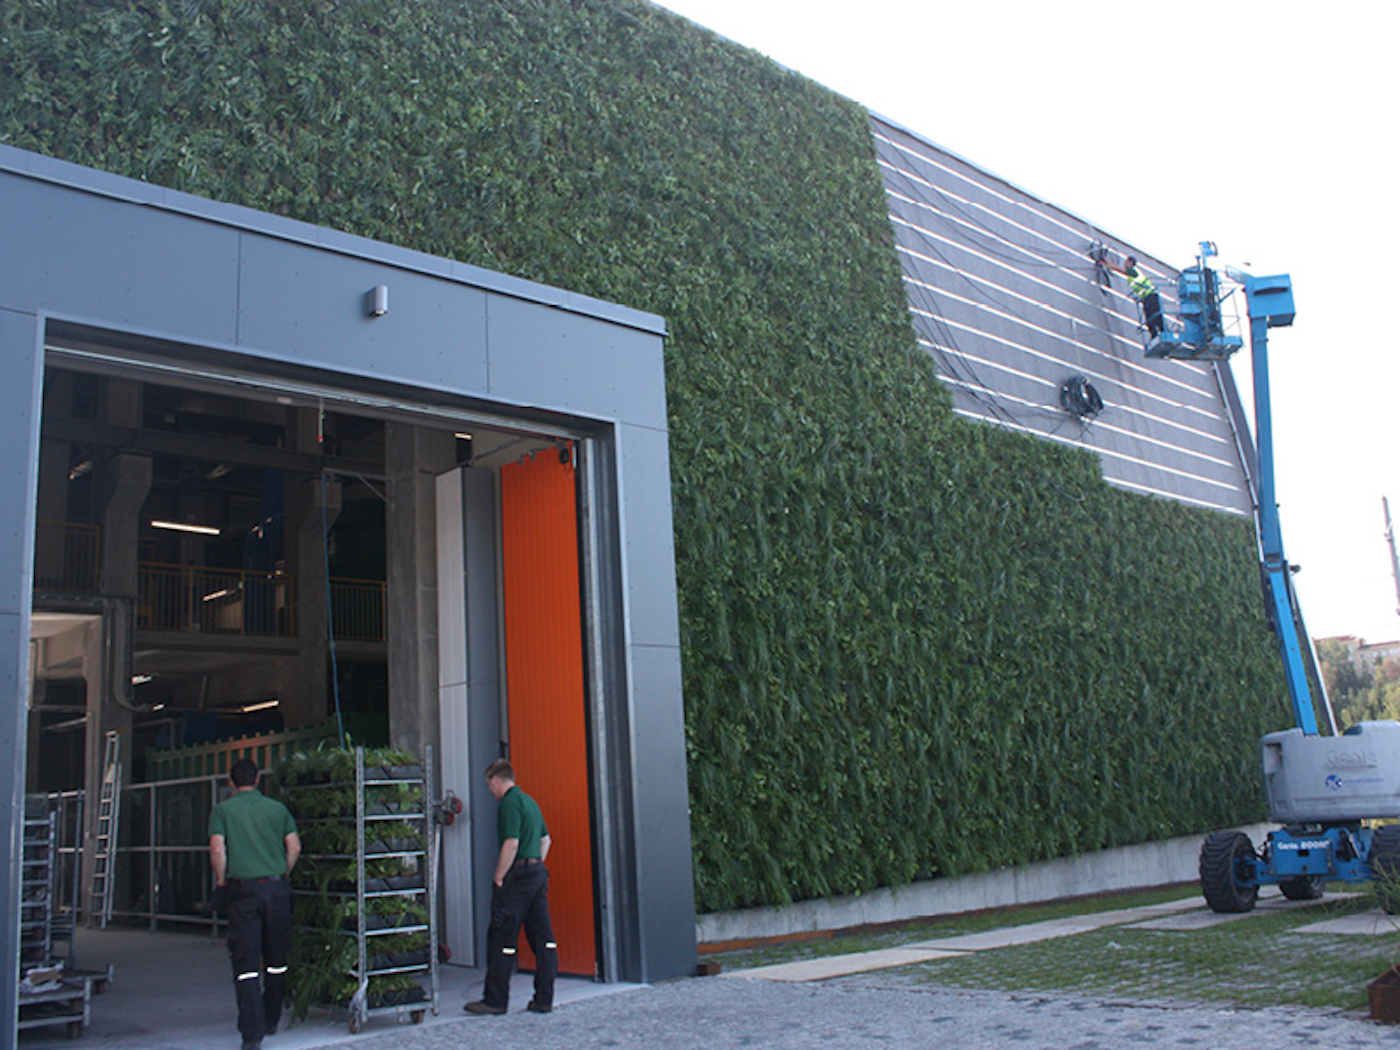 installing a green wall on a recycling centre